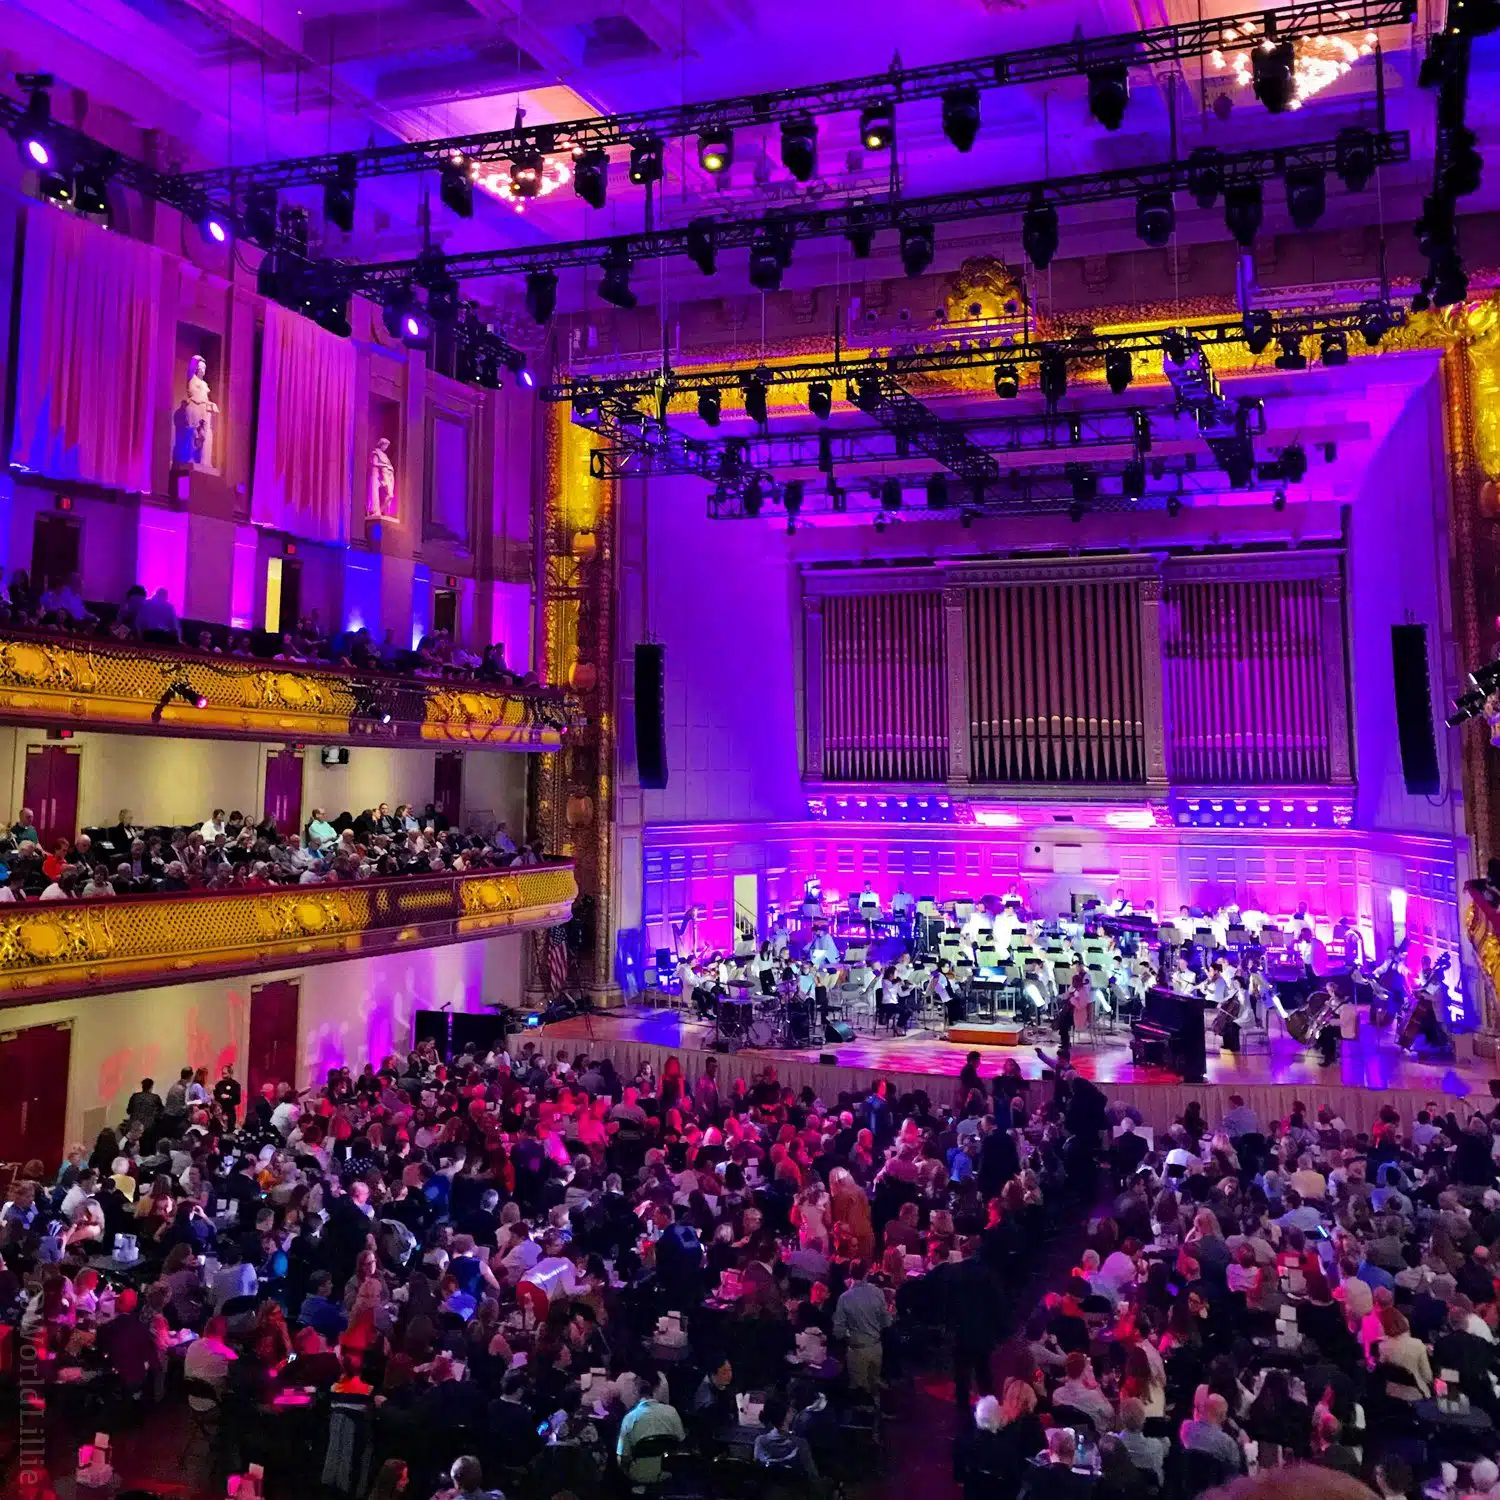 Seeing Leslie Odom Jr. perform at Symphony Hall in Boston was a highlight of the year.